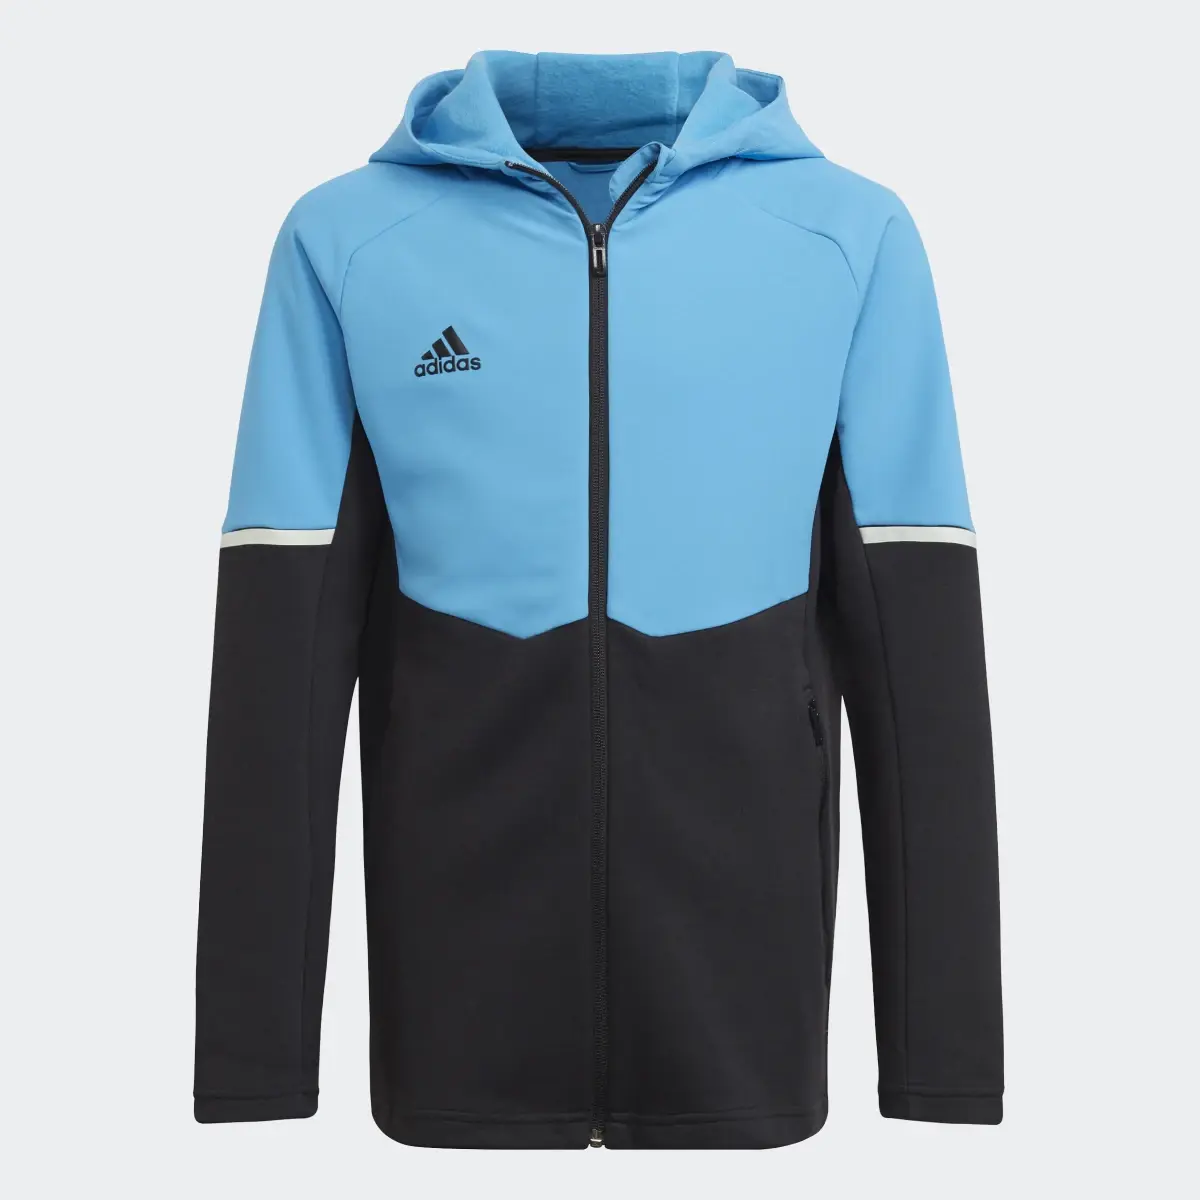 Adidas Designed for Gameday Hooded Track Top. 1